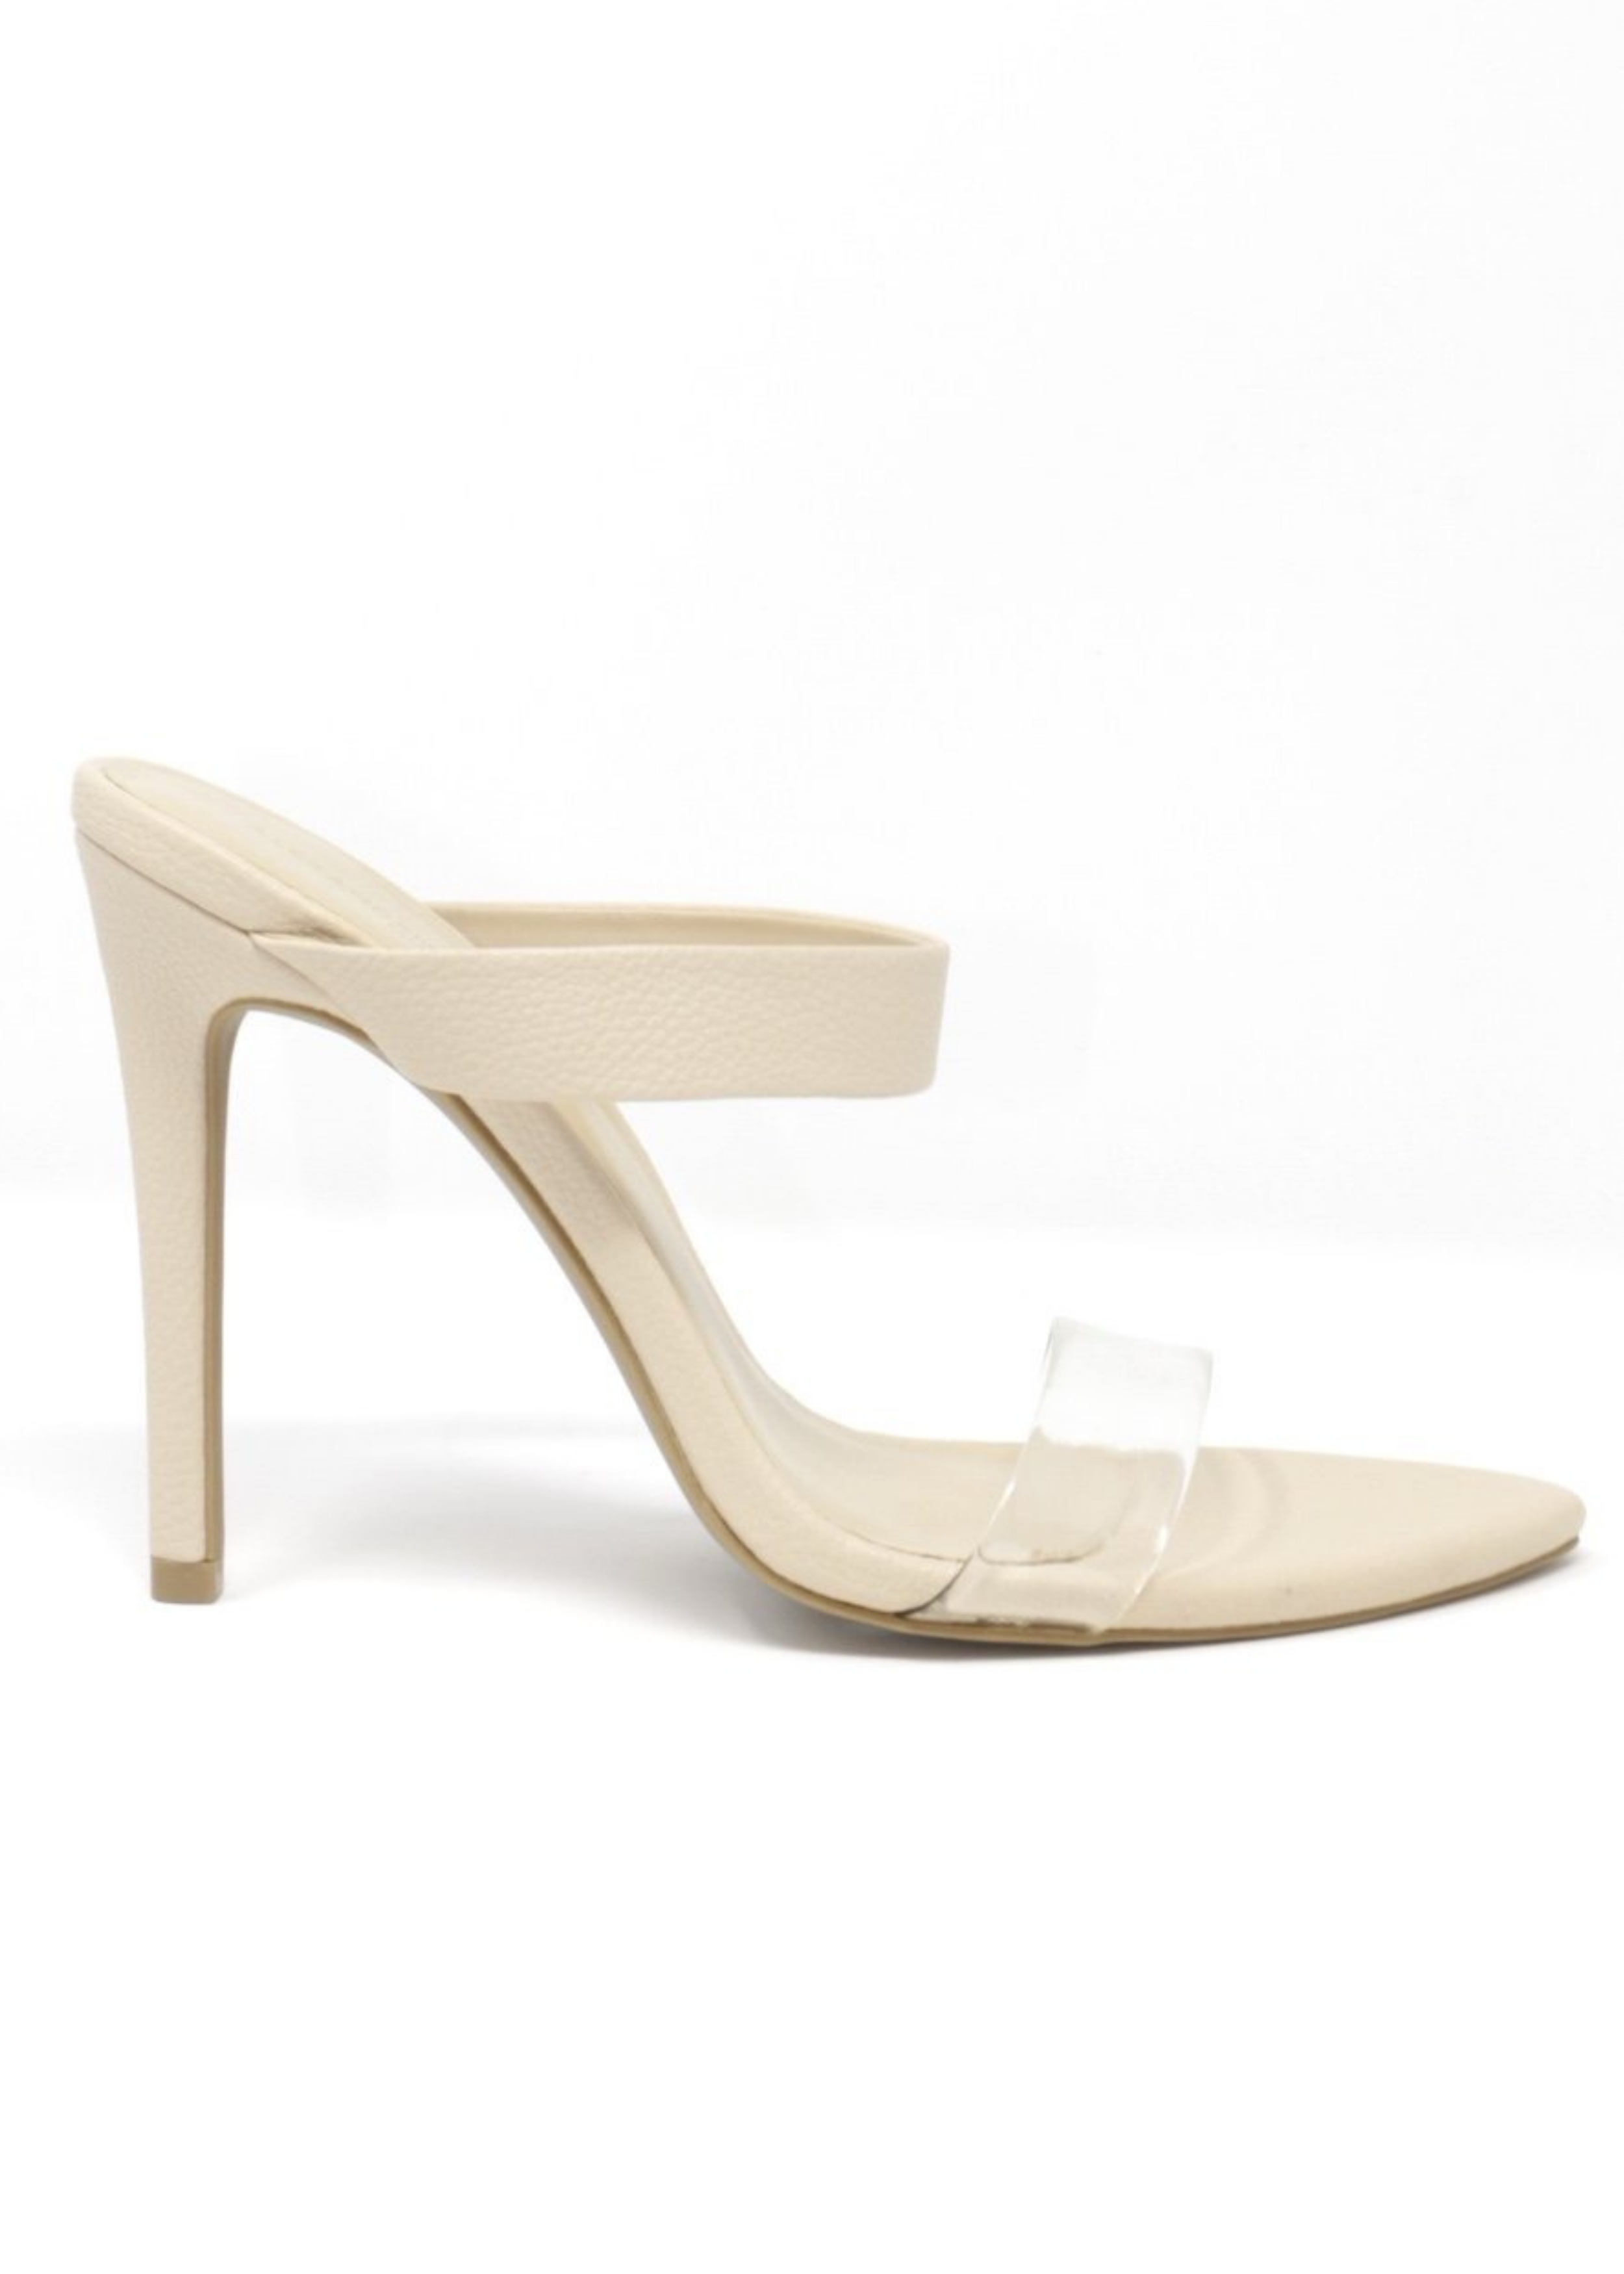  Audrey Heels with Clear Strap in front where the feet are and nude strap  on the bridge of foot. Has a point sole and you slip it on and off.  The back is always showing and free.